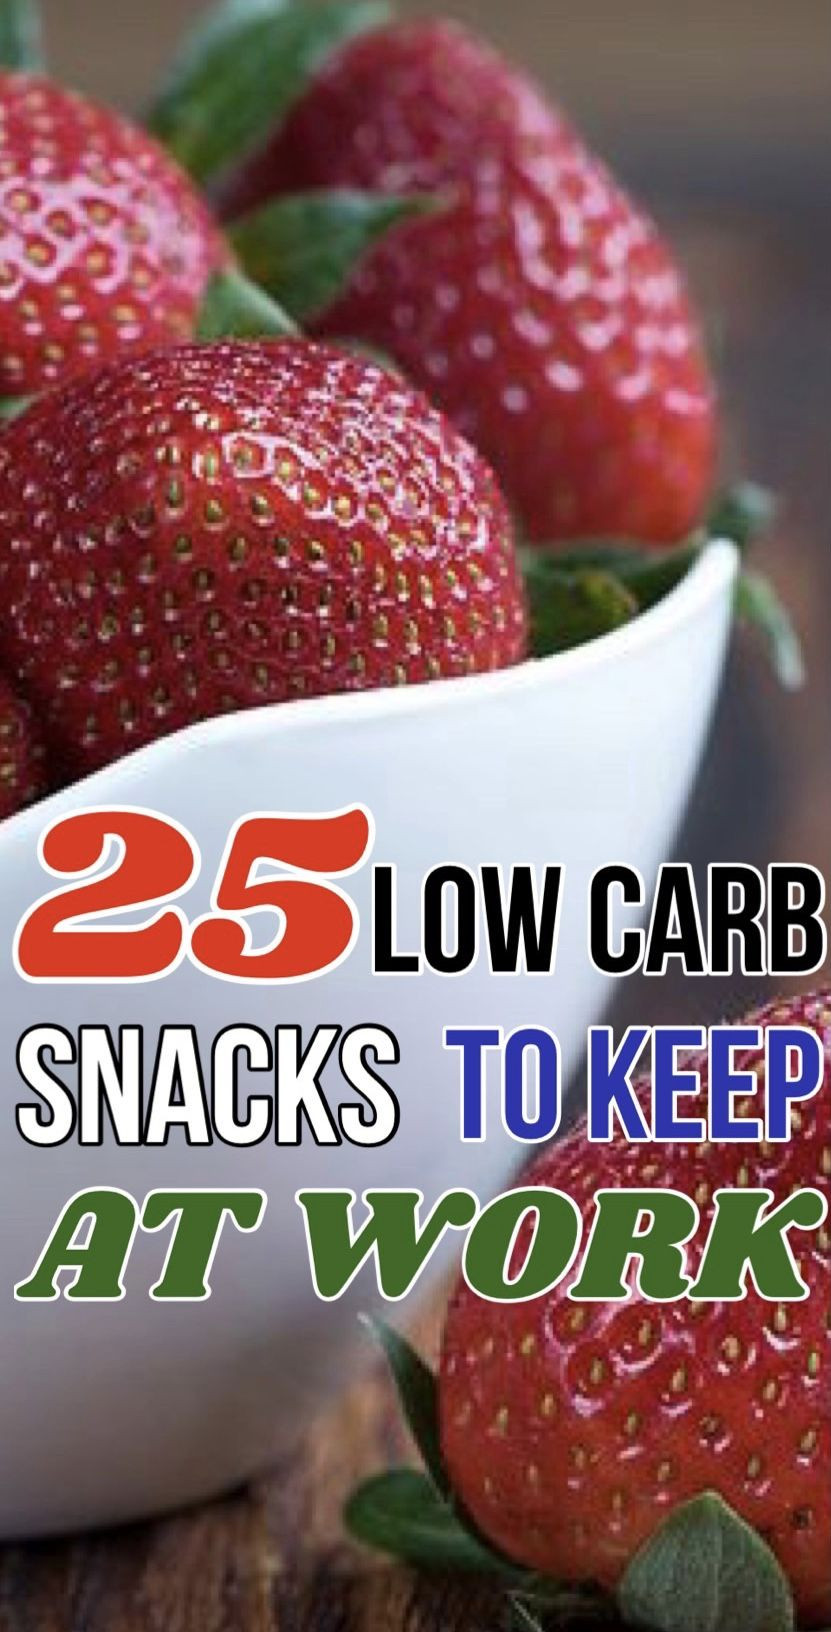 Healthy Snacks To Keep At Work
 25 Low Carb Snacks to Keep at Work